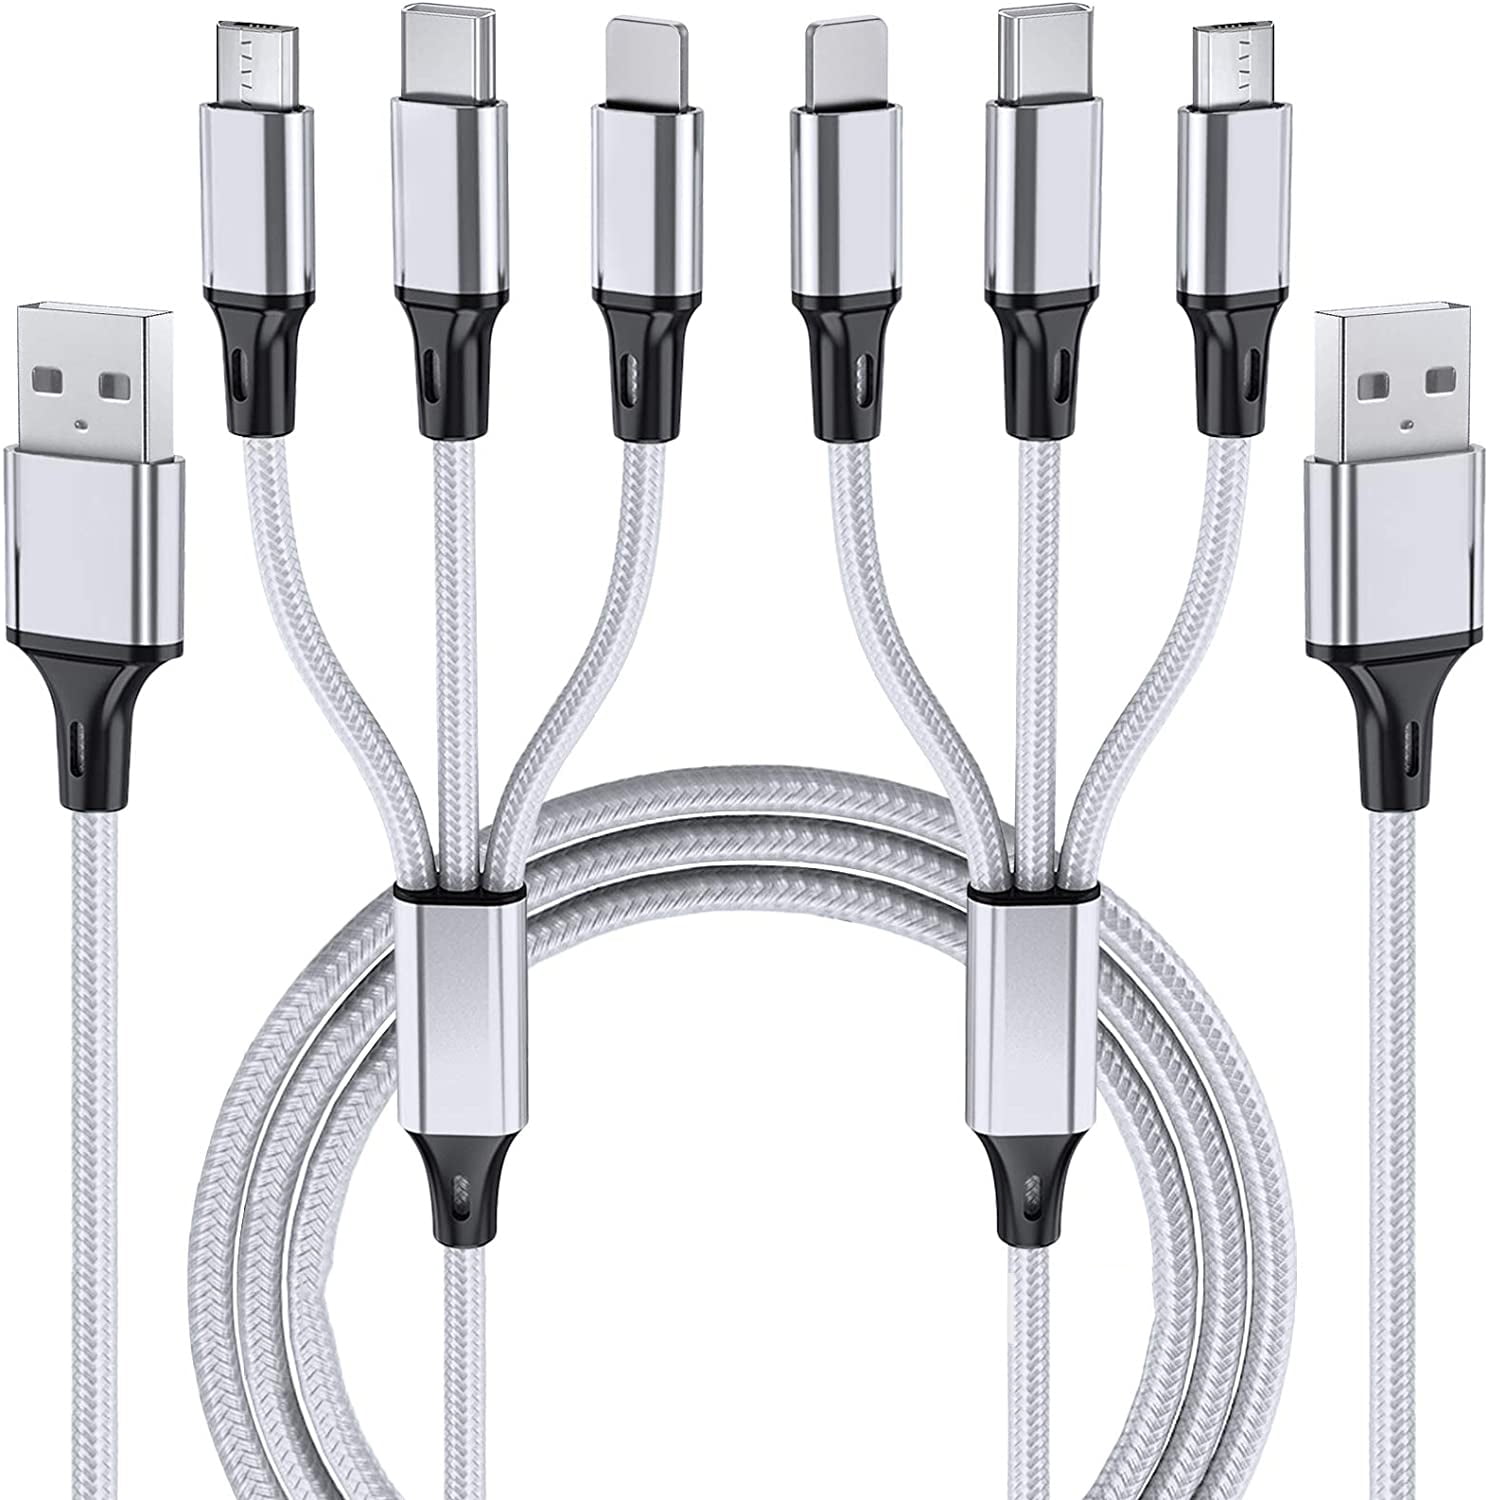 IGBSGFN 3 in 1 Universal Interface Multi Charging Cable Akatsuki Red Cloud USB Cable for Most Phones 